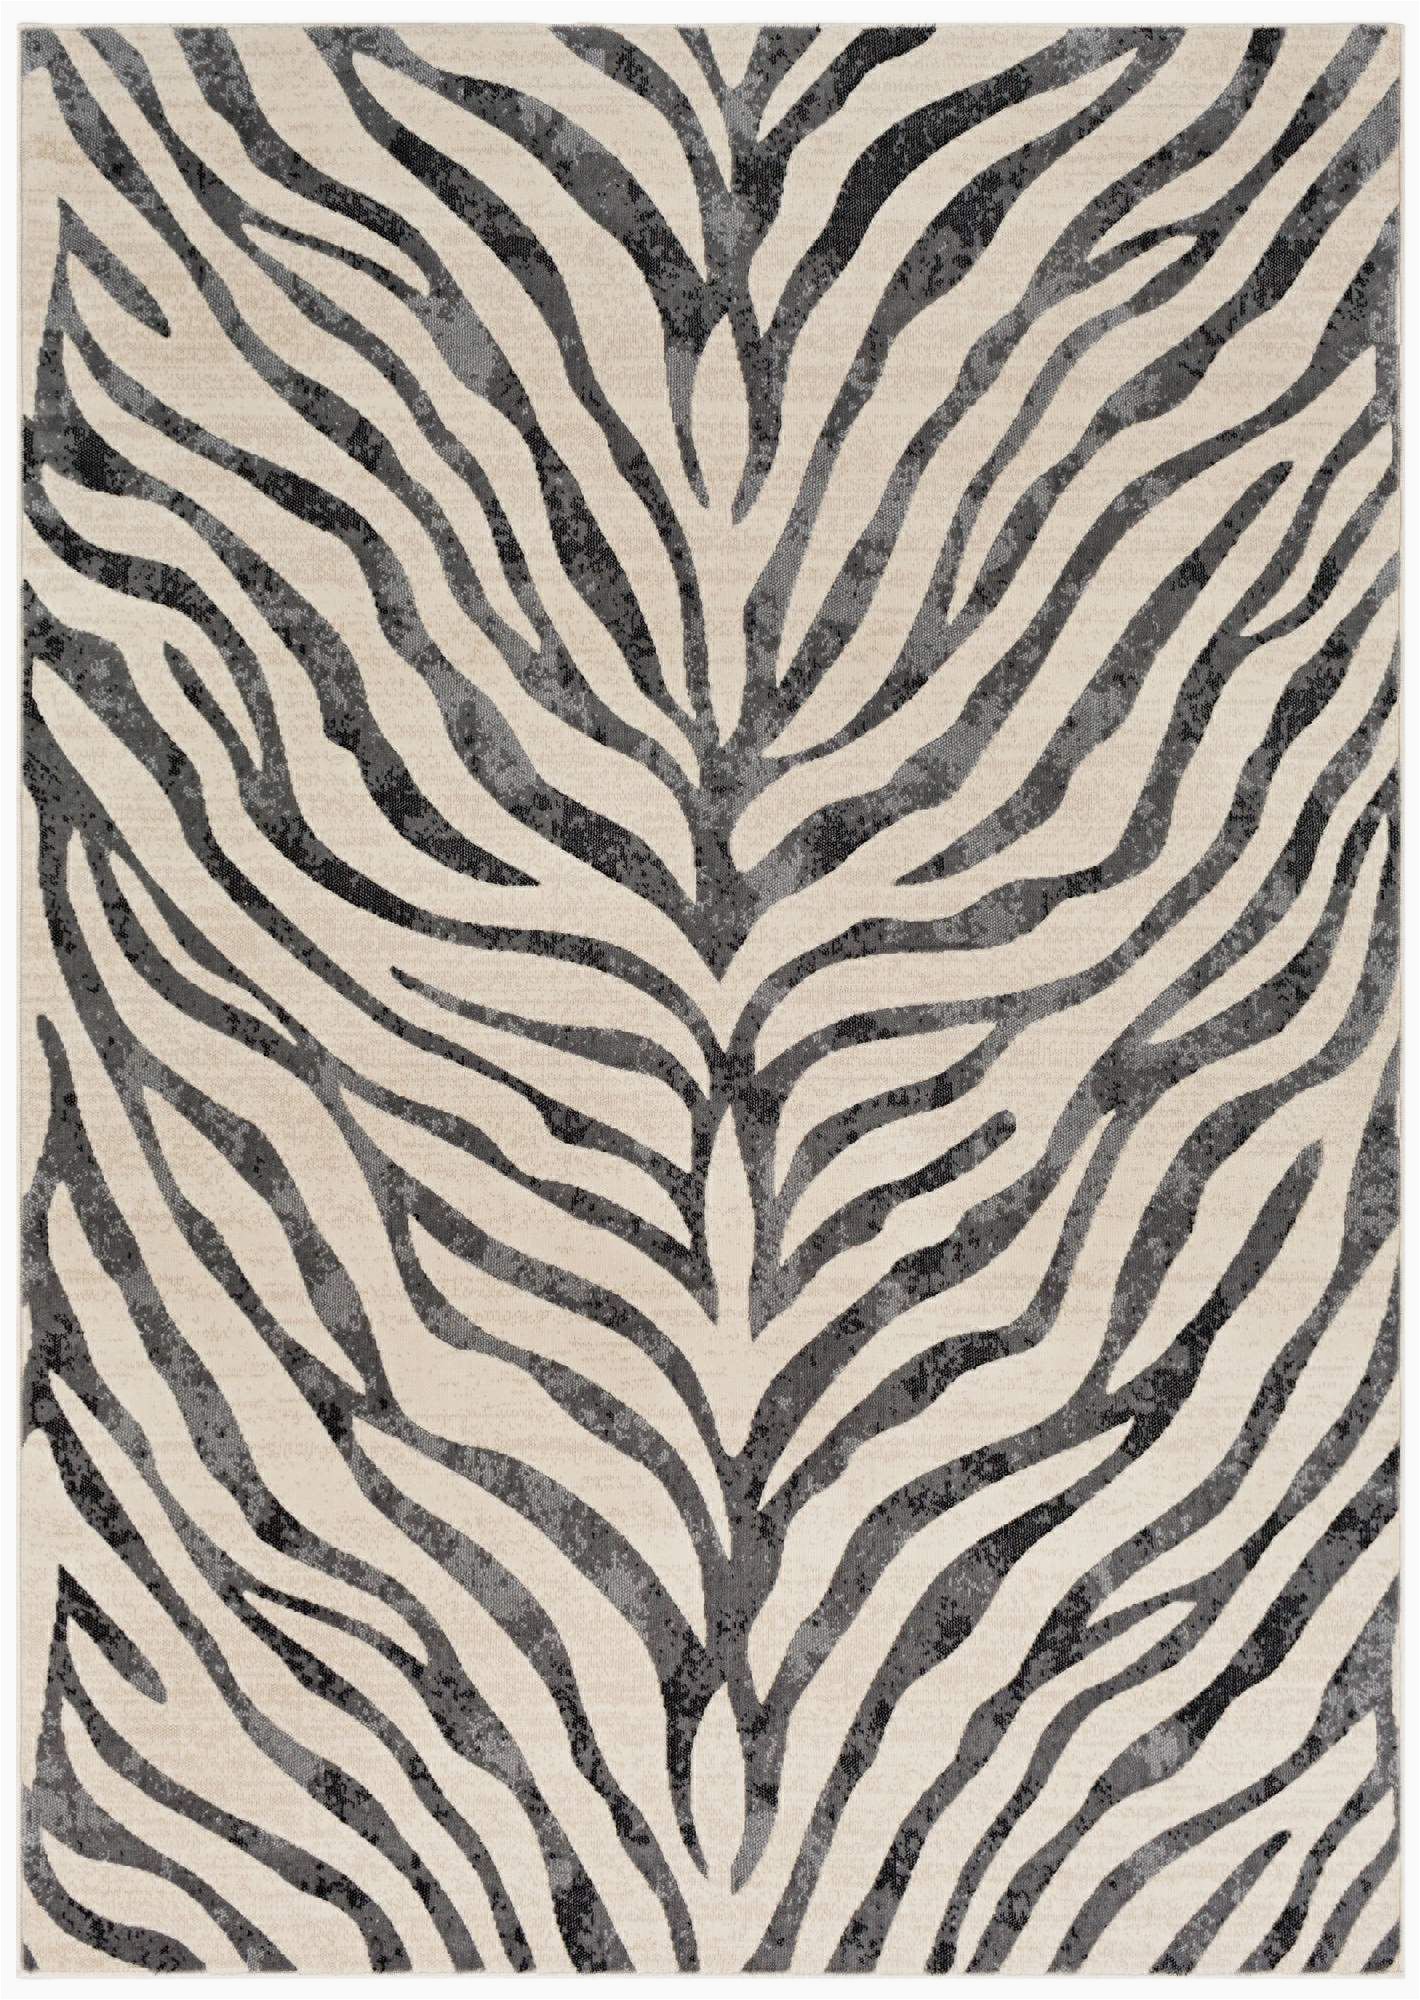 Zebra Print area Rug 8×10 Rugs City Cr613 Taupe area Rug In 2020